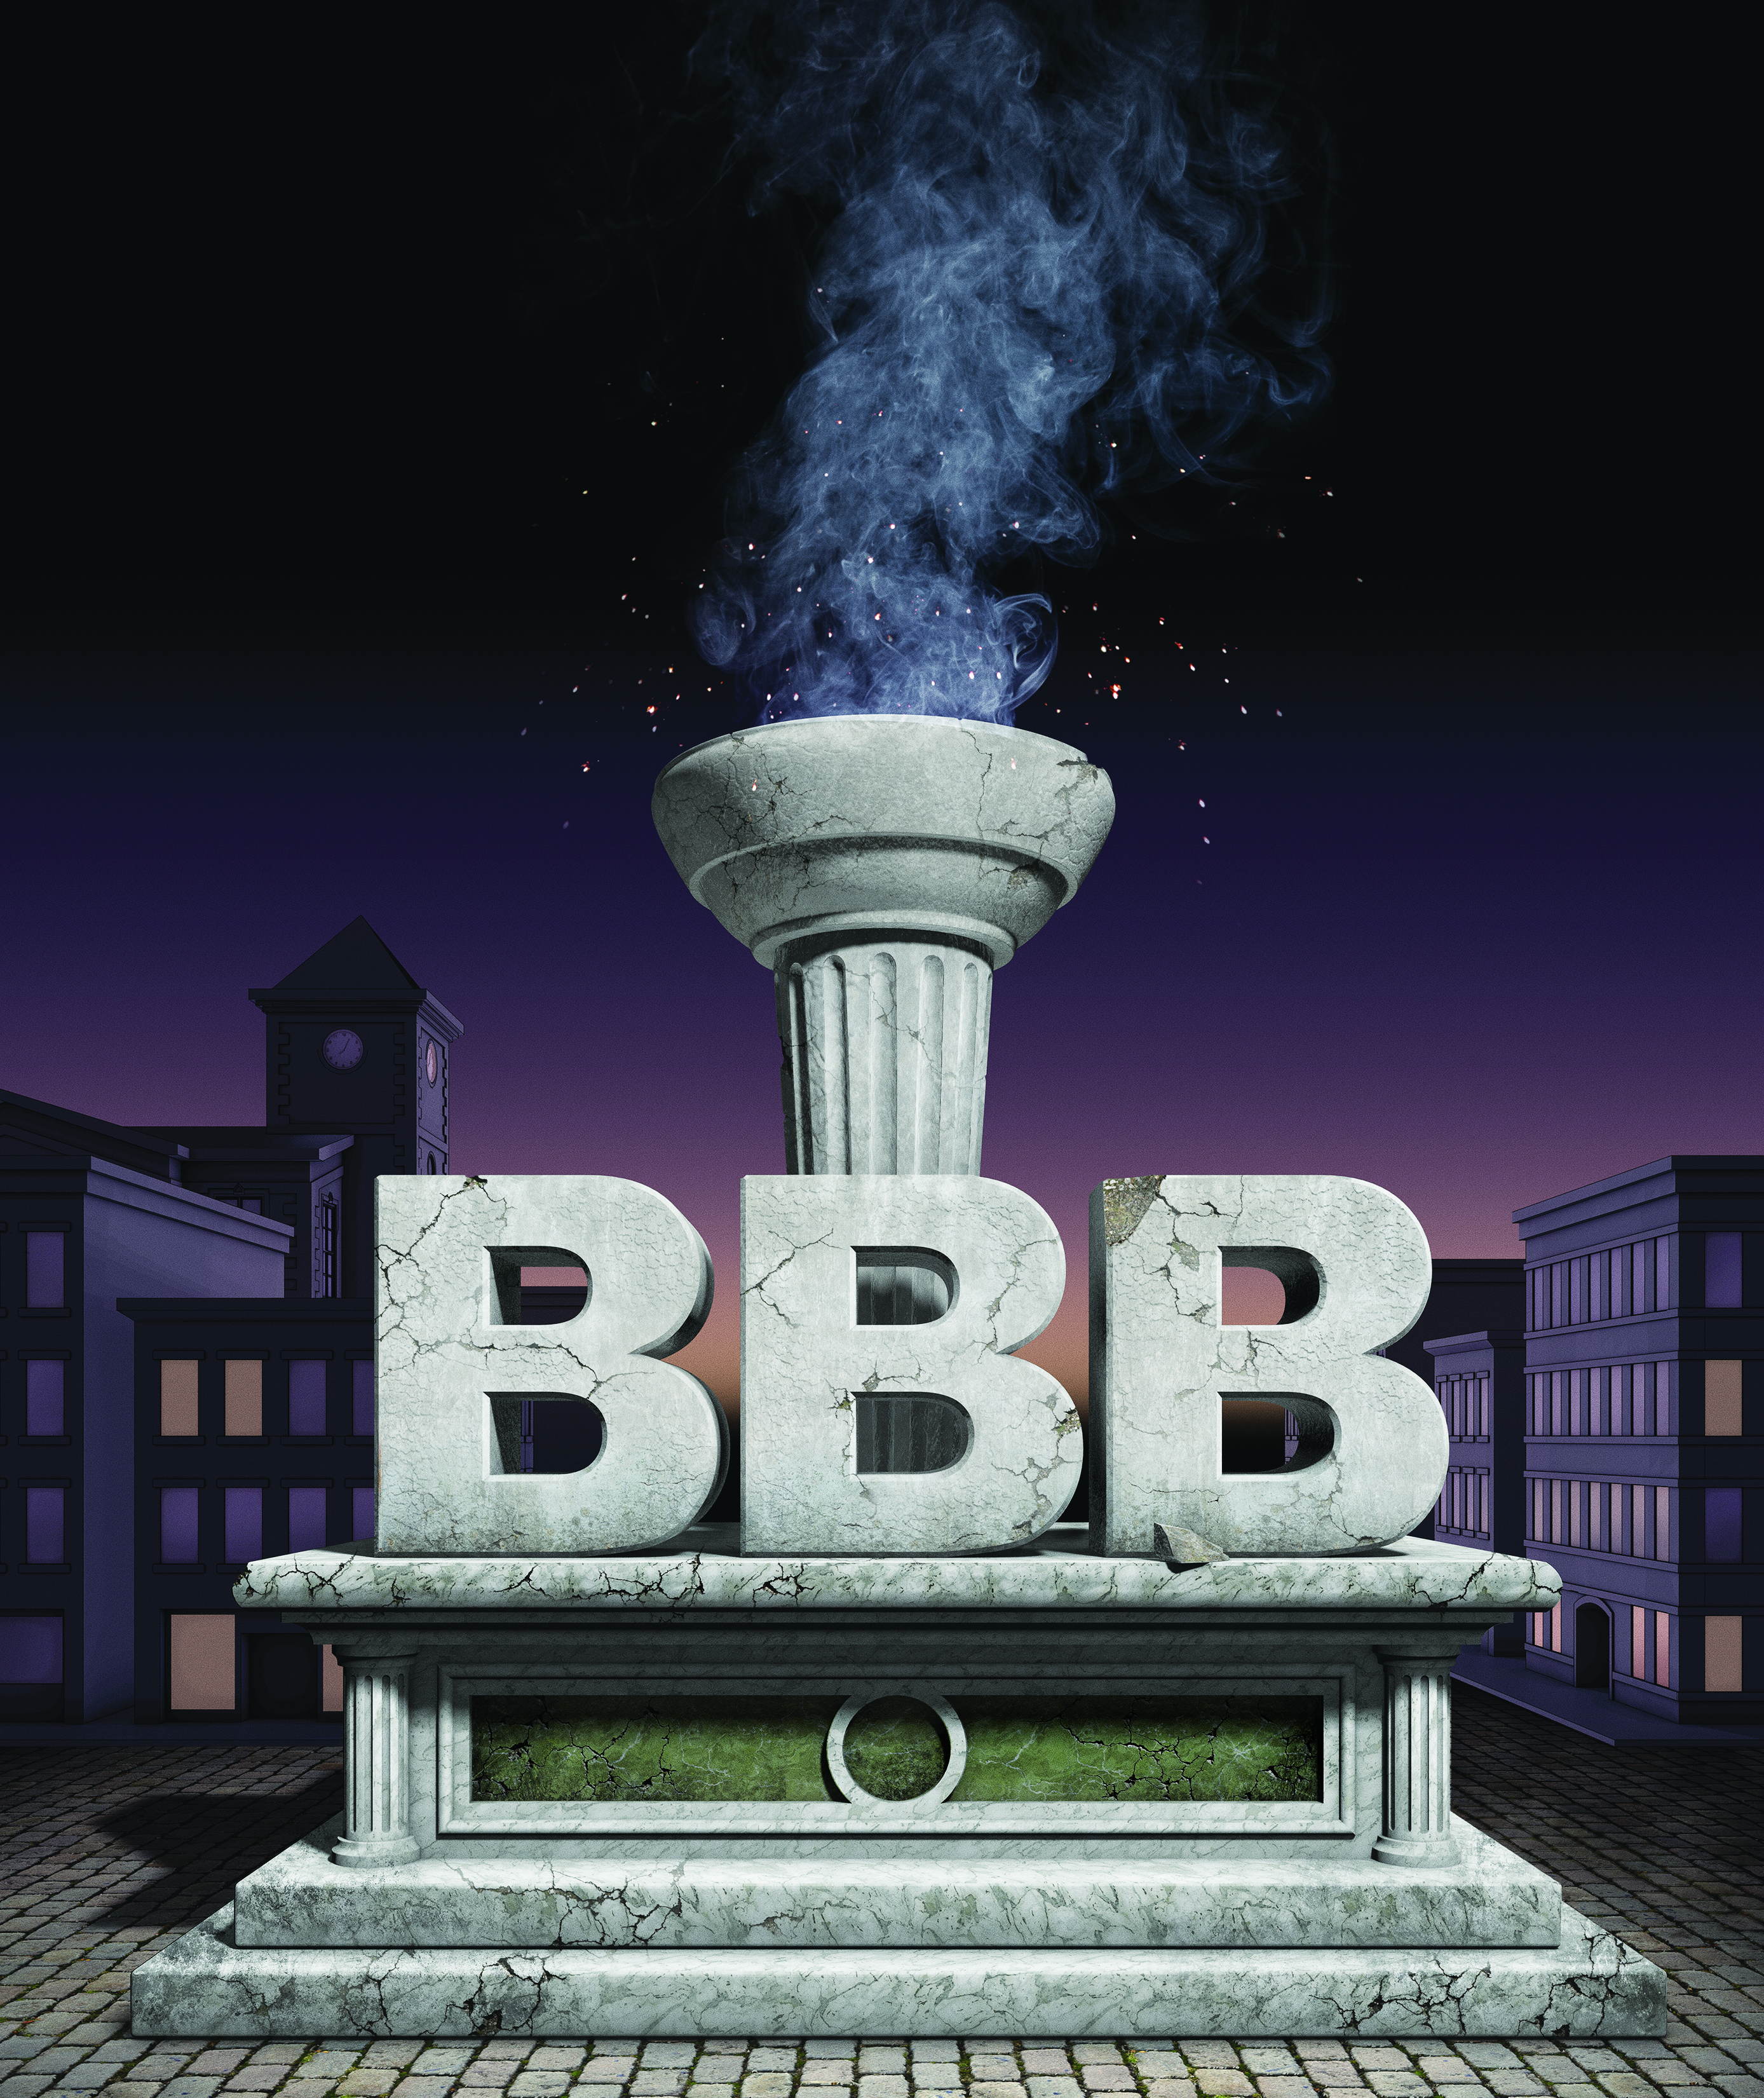 is the better business bureau, a home for remodelers, failing or not